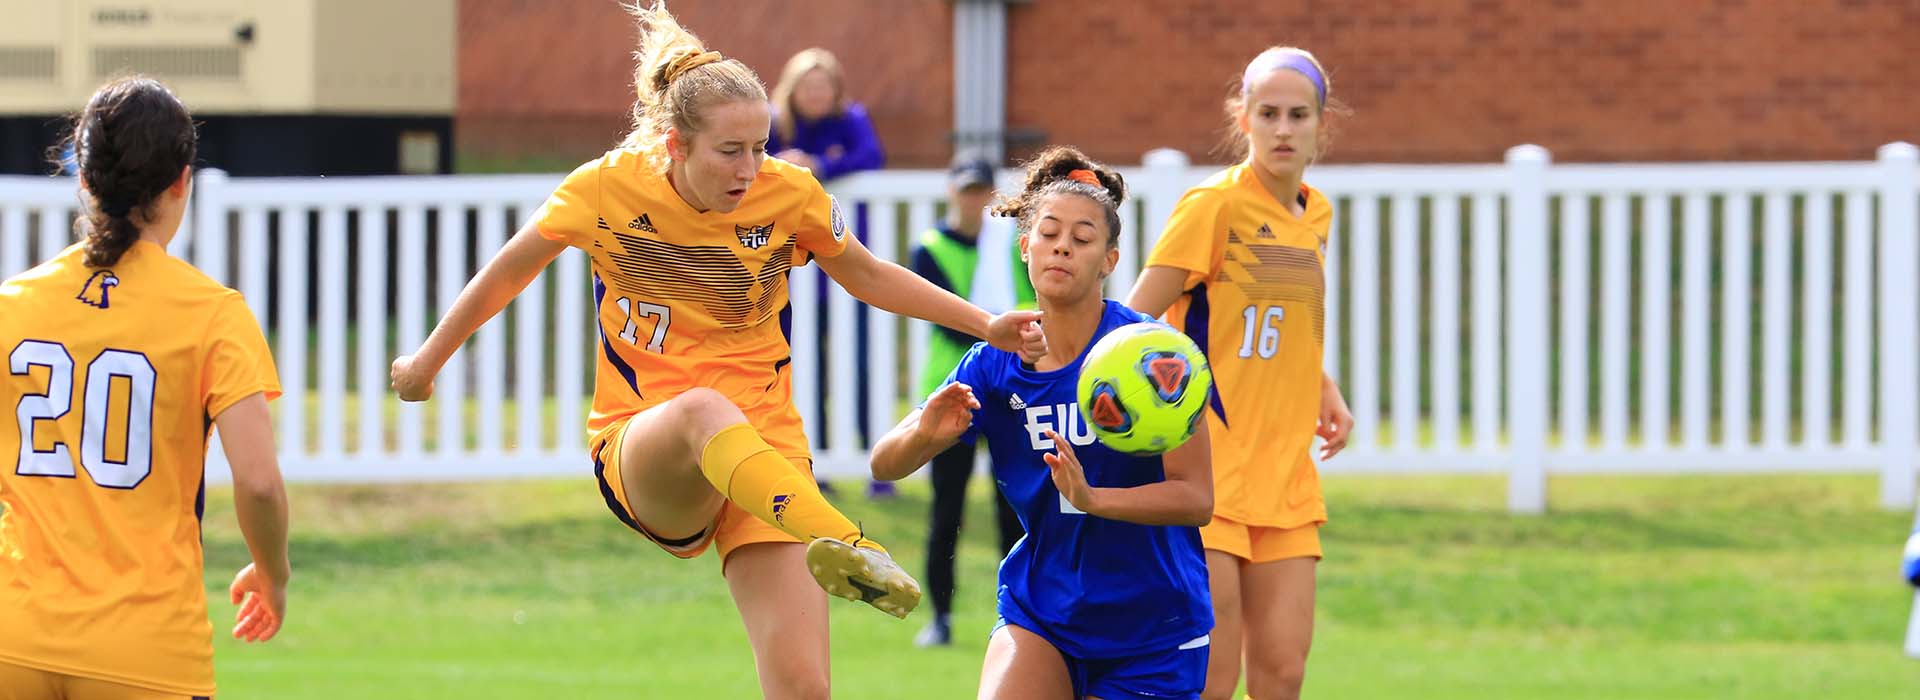 Golden Eagles to tangle with No. 4 Murray State in Sunday’s OVC Tournament quarterfinal